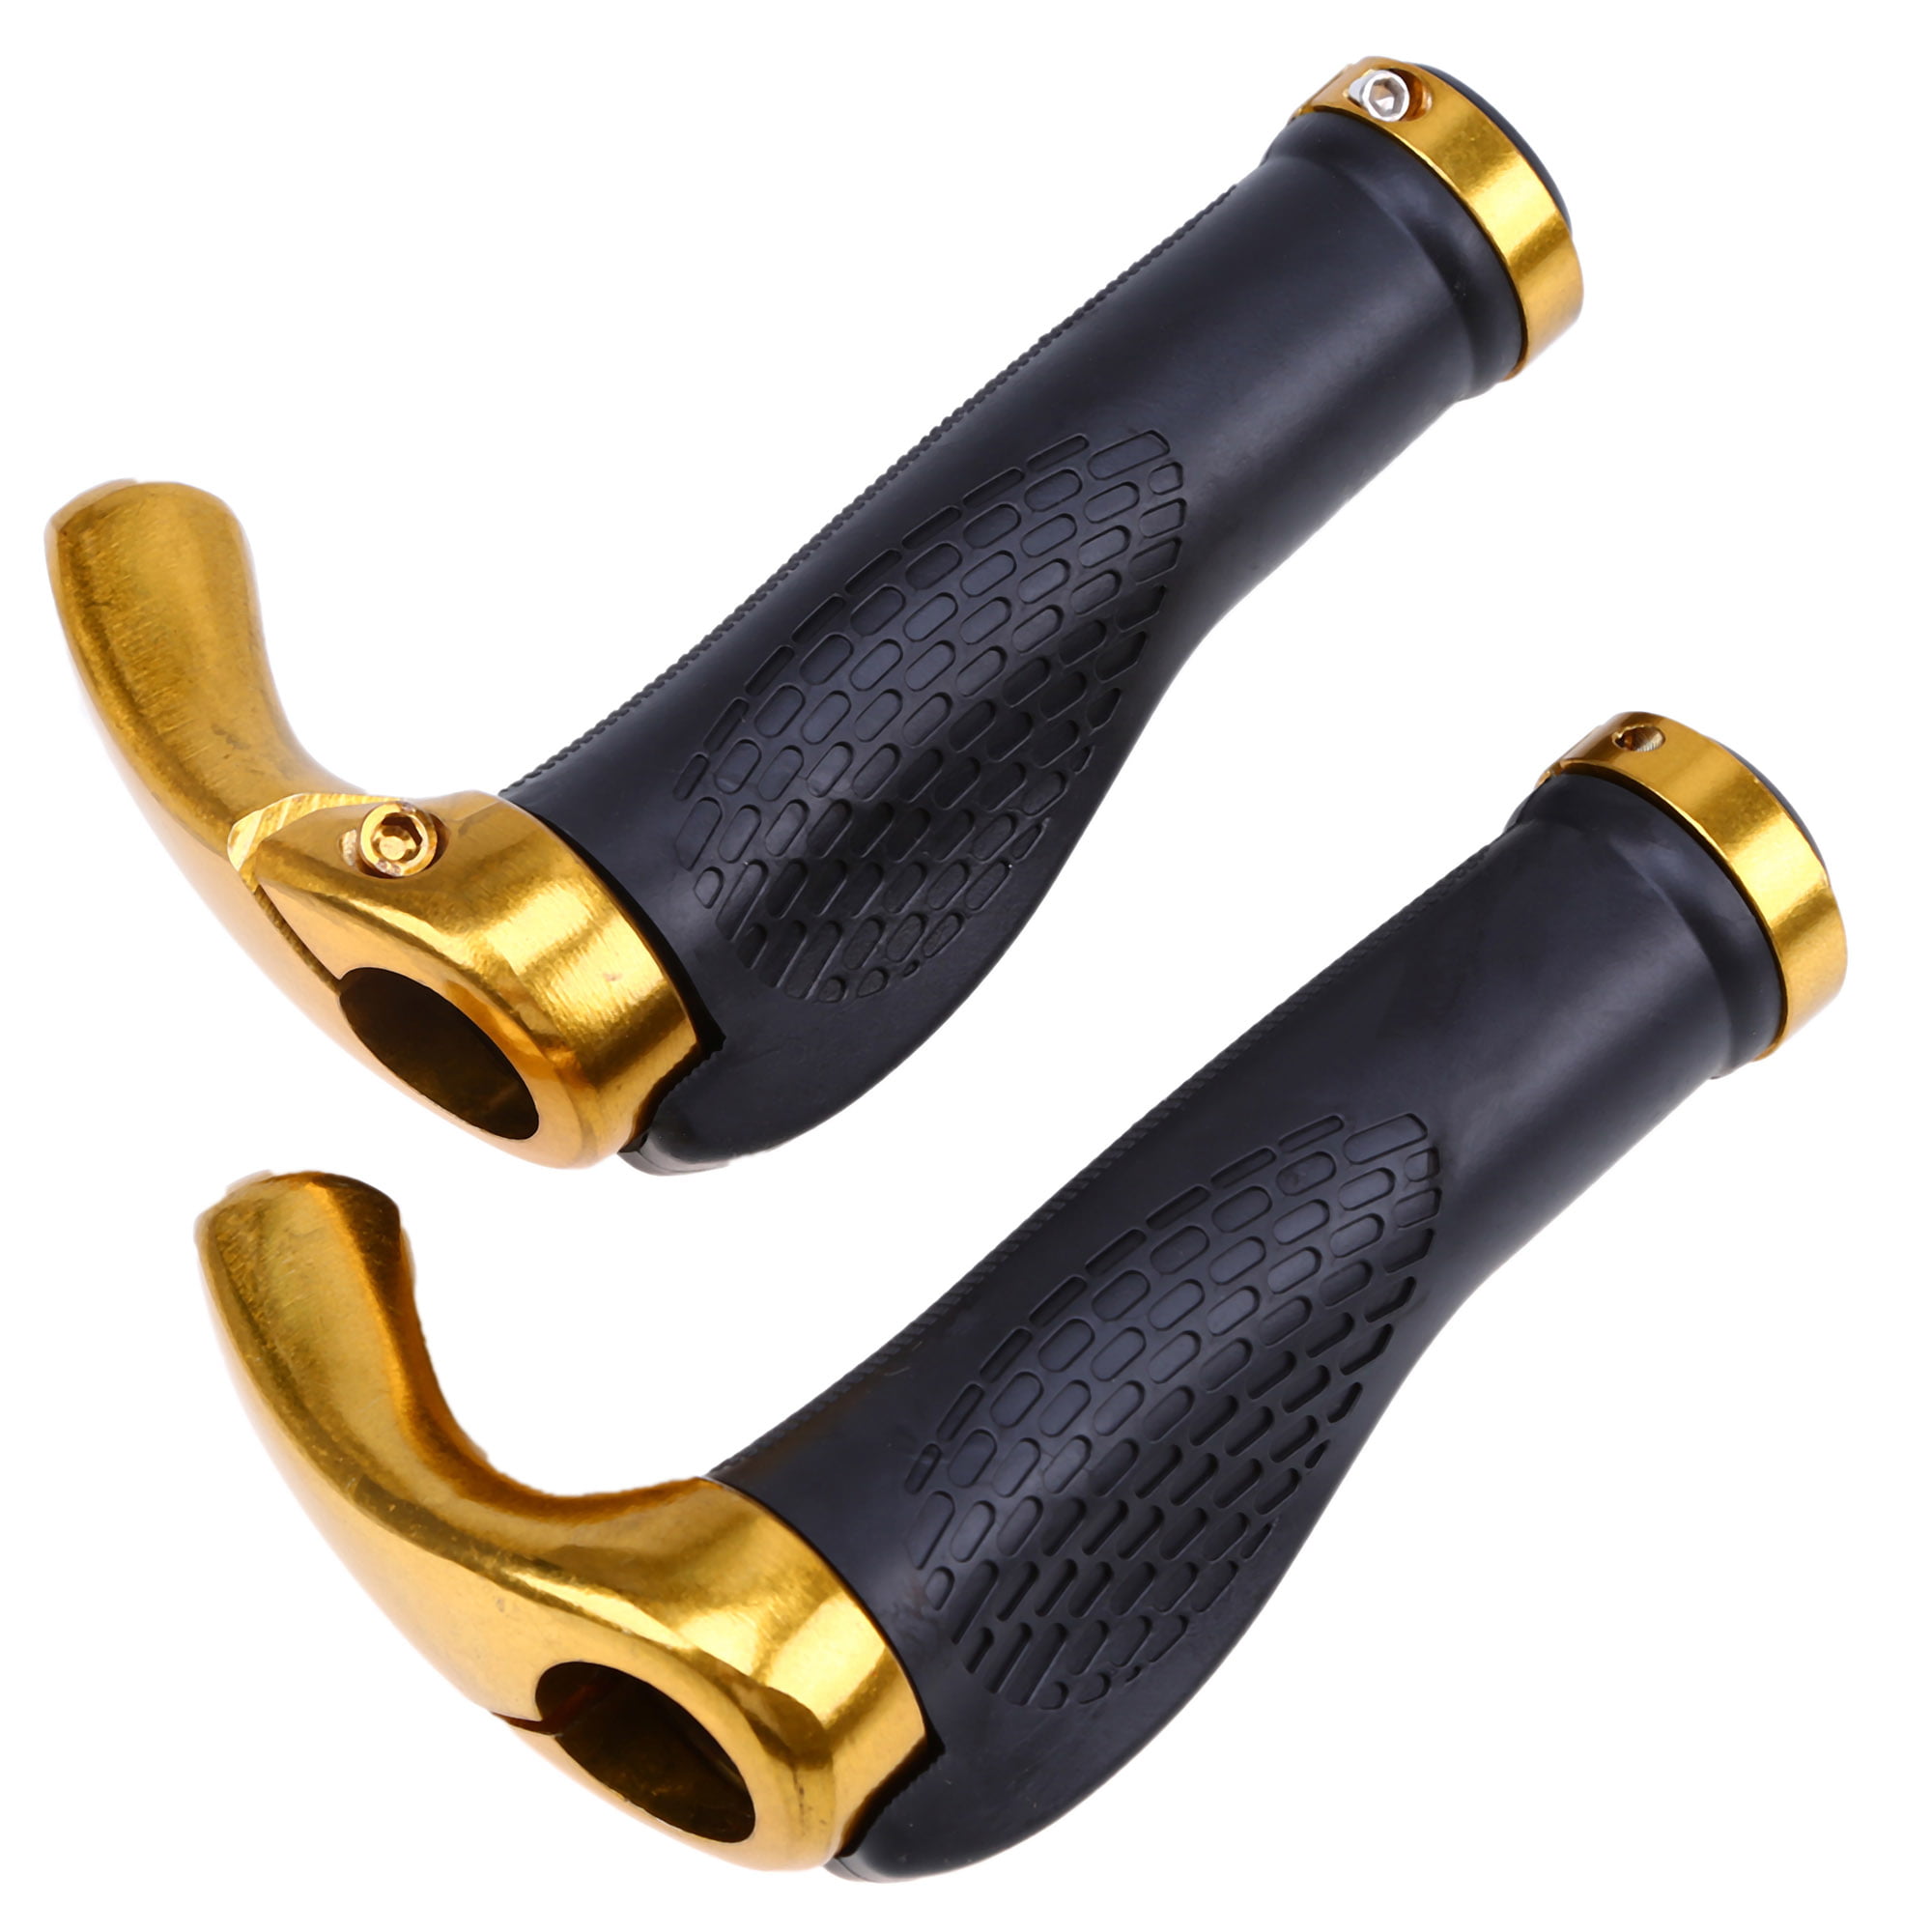 Details about   2Pcs Handlebar Grips Bike Hand Grip Mountain Bicycle Cycling Handle Bar Lock on 